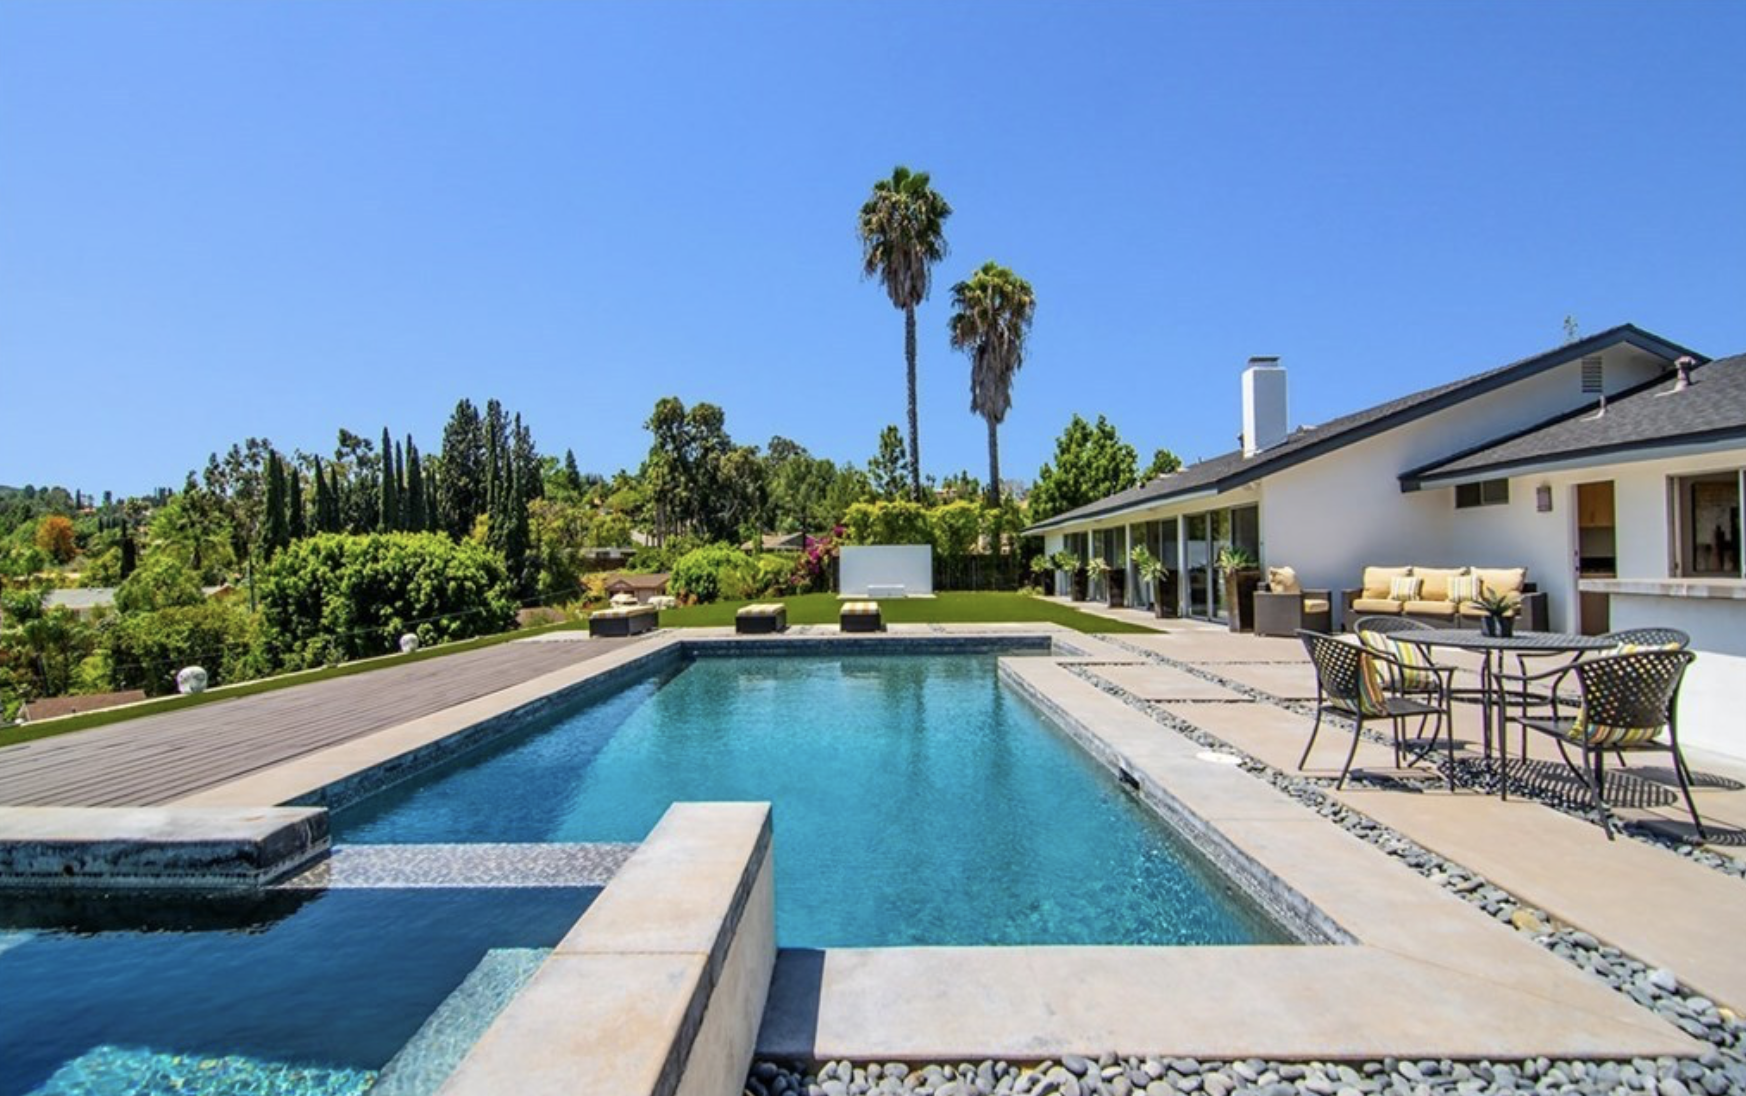 5318 Felice Place, Woodland Hills Sold - $1,510,000